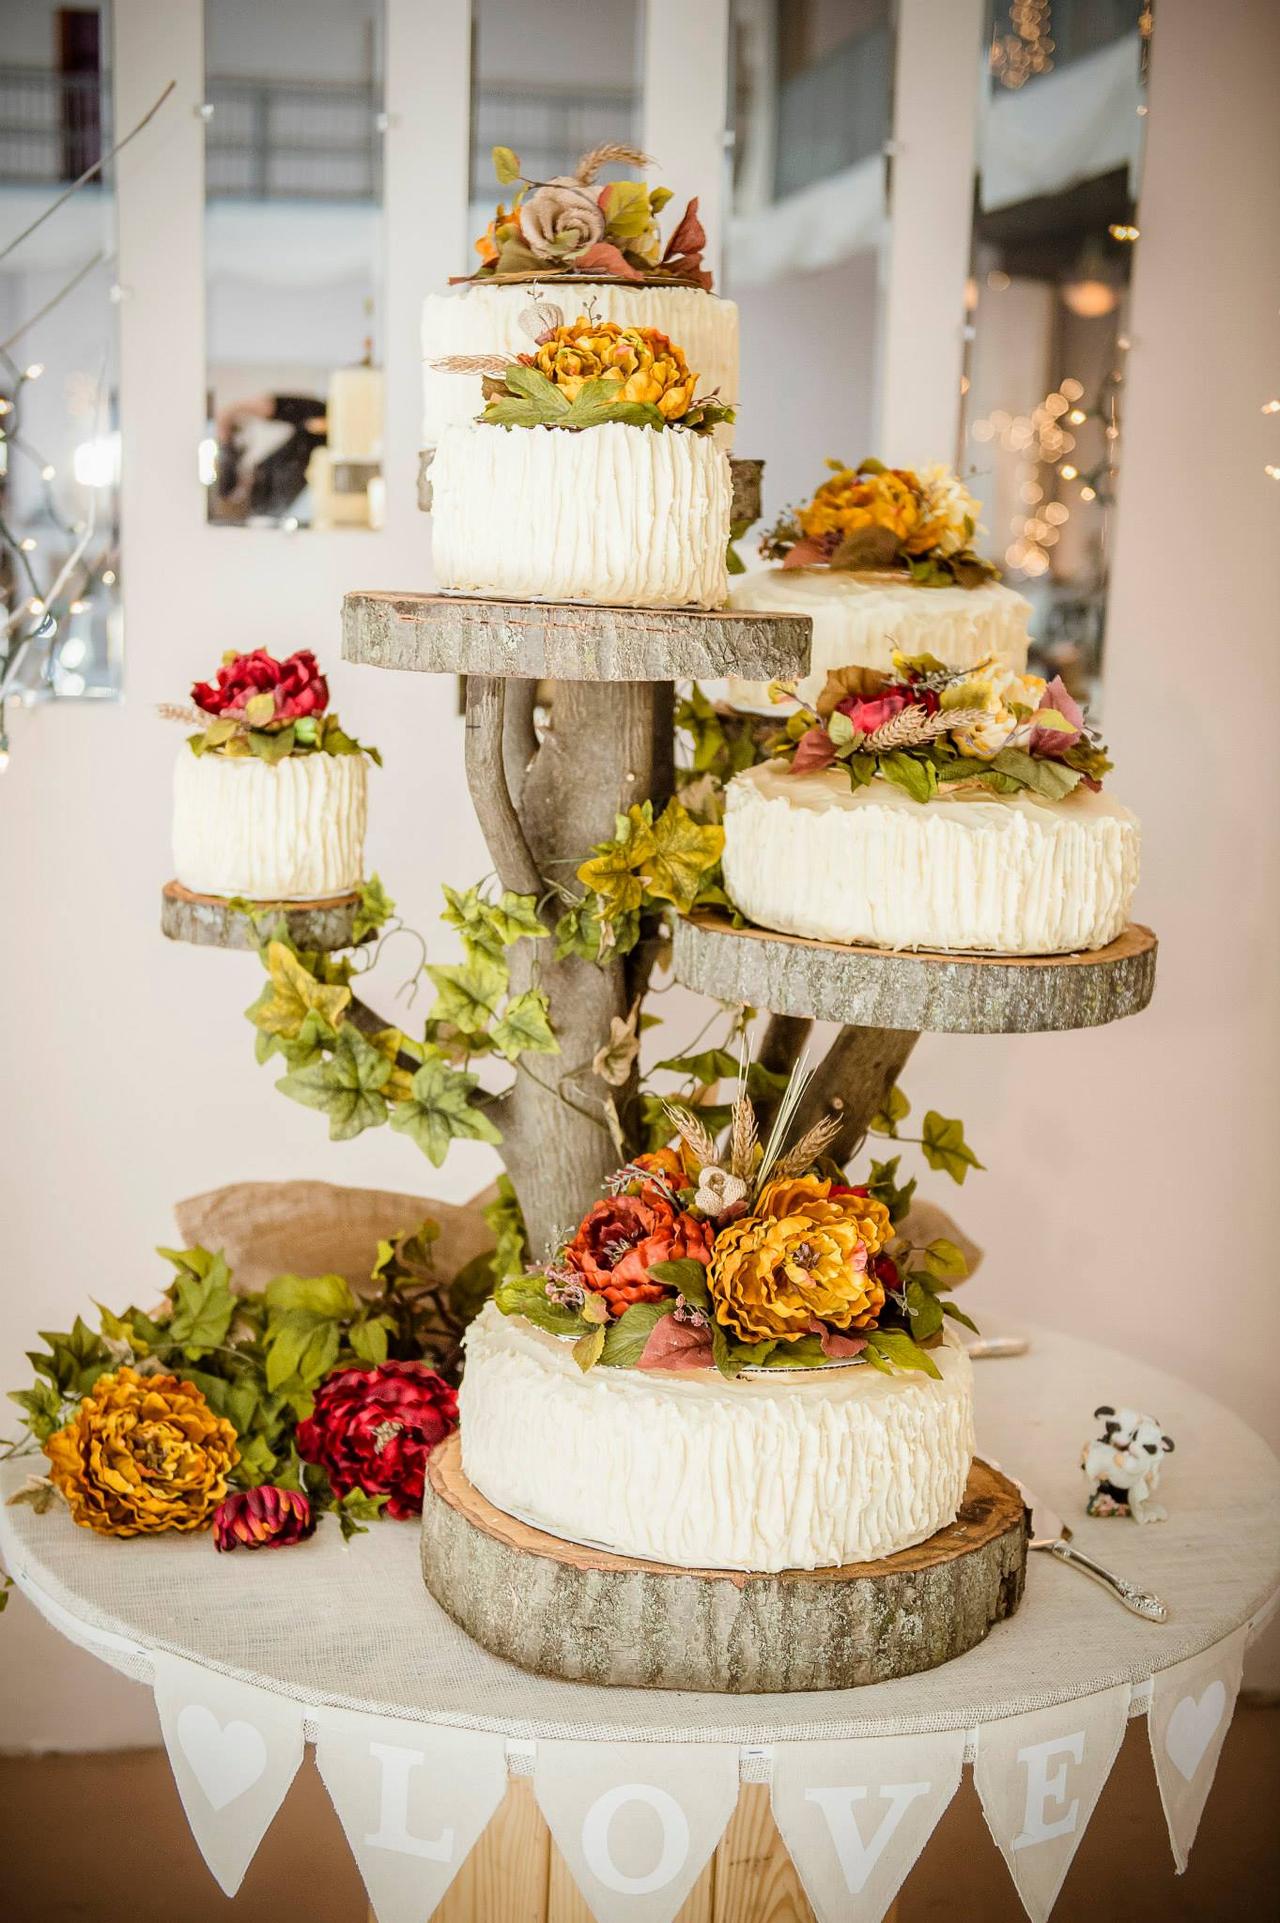 Fresh Flower Wedding Cakes: 15 Ideas For Adding Real Blossoms To Your Big  Day Dessert | by Bride & Blossom, NYC's Only Luxury Wedding Florist --  Wedding Ideas, Tips and Trends for